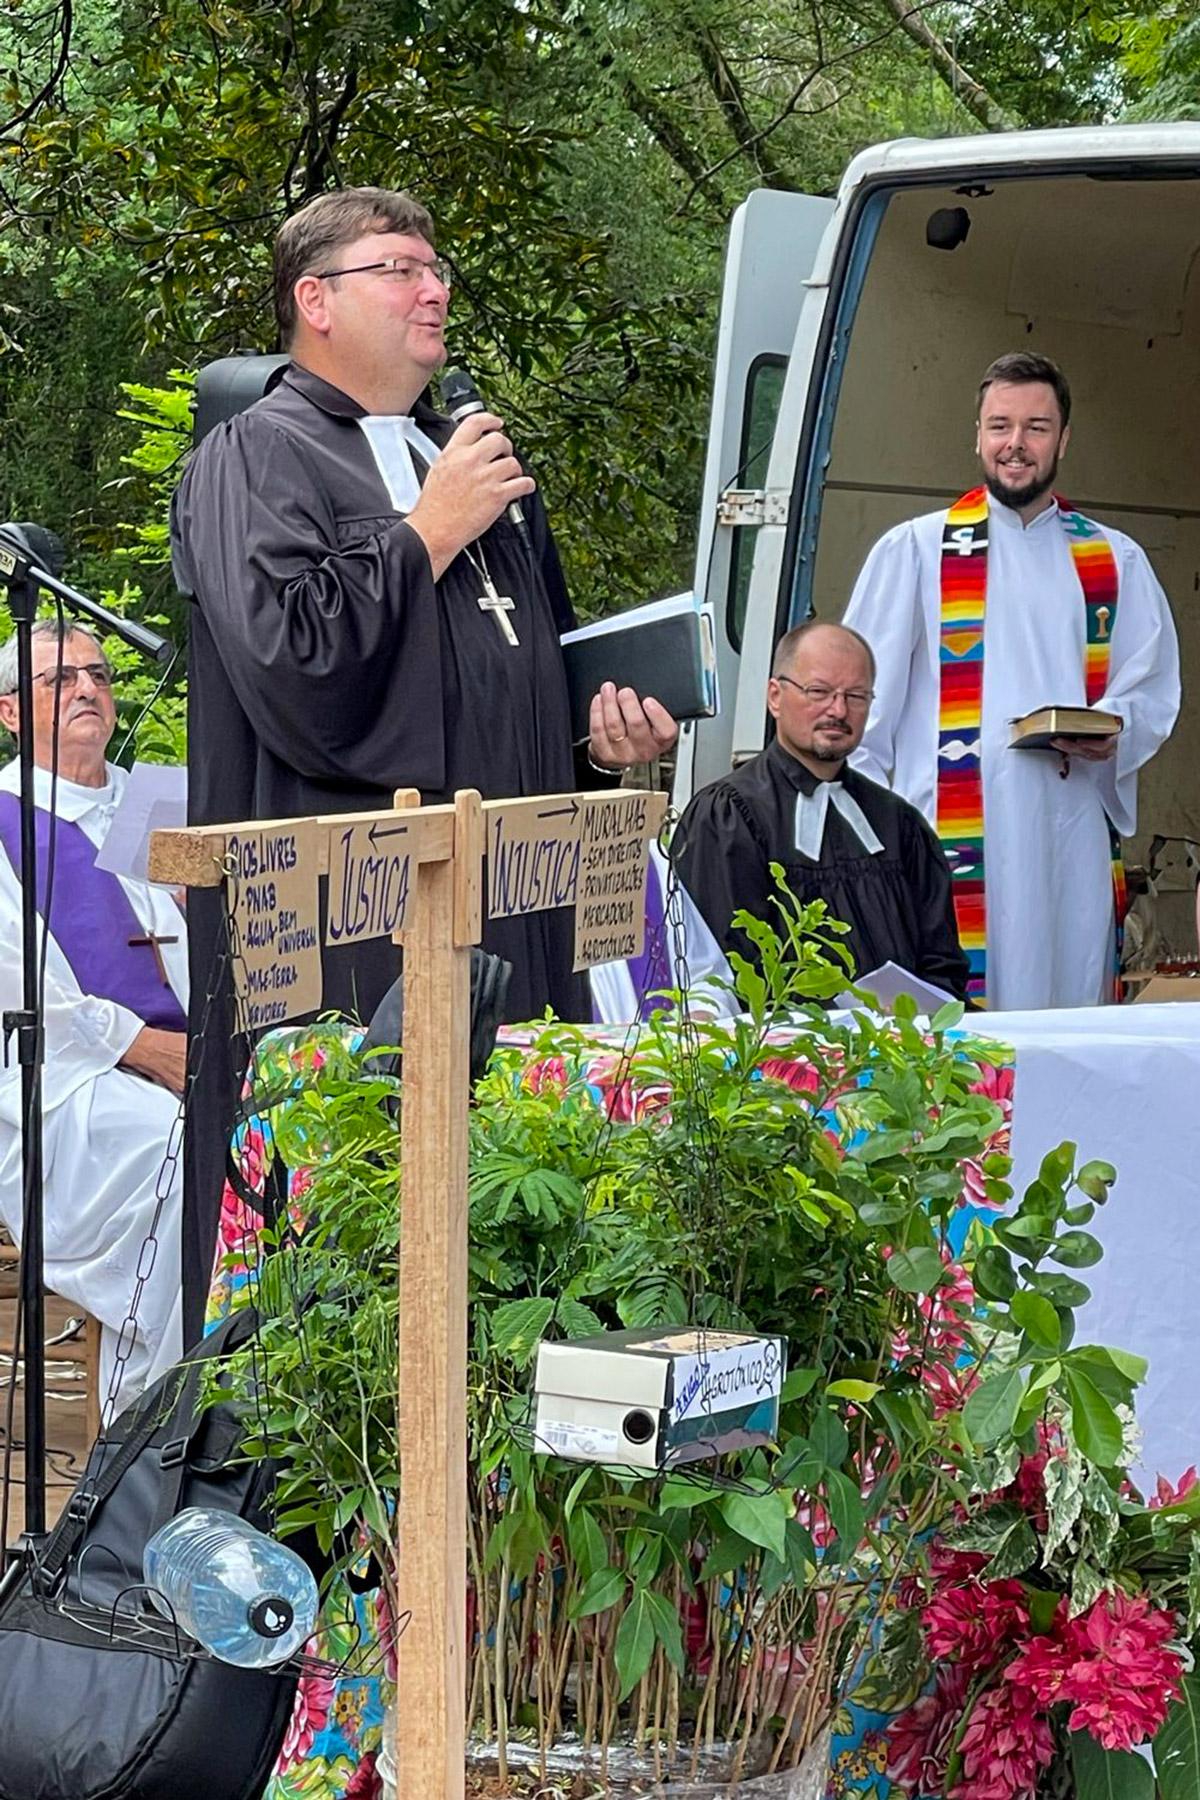 Rev. Fábio Rucks from the IECLB preaching during the 7th Binational Ecumenical Celebration for Free Rivers. Photo: IECLB